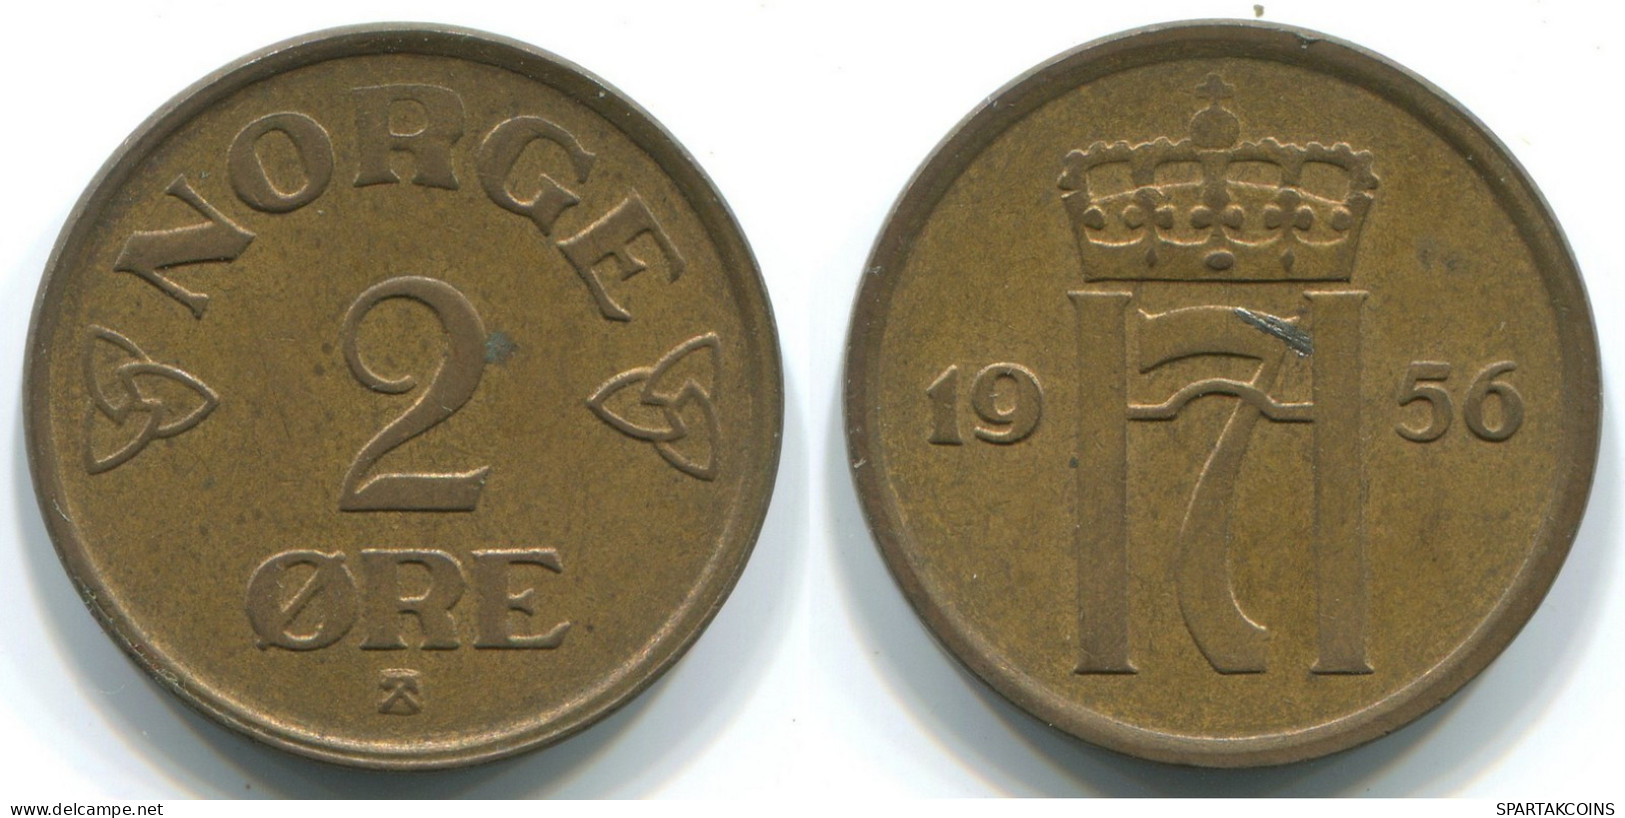 2 ORE 1956 NORWAY Coin #WW1061.U.A - Norway